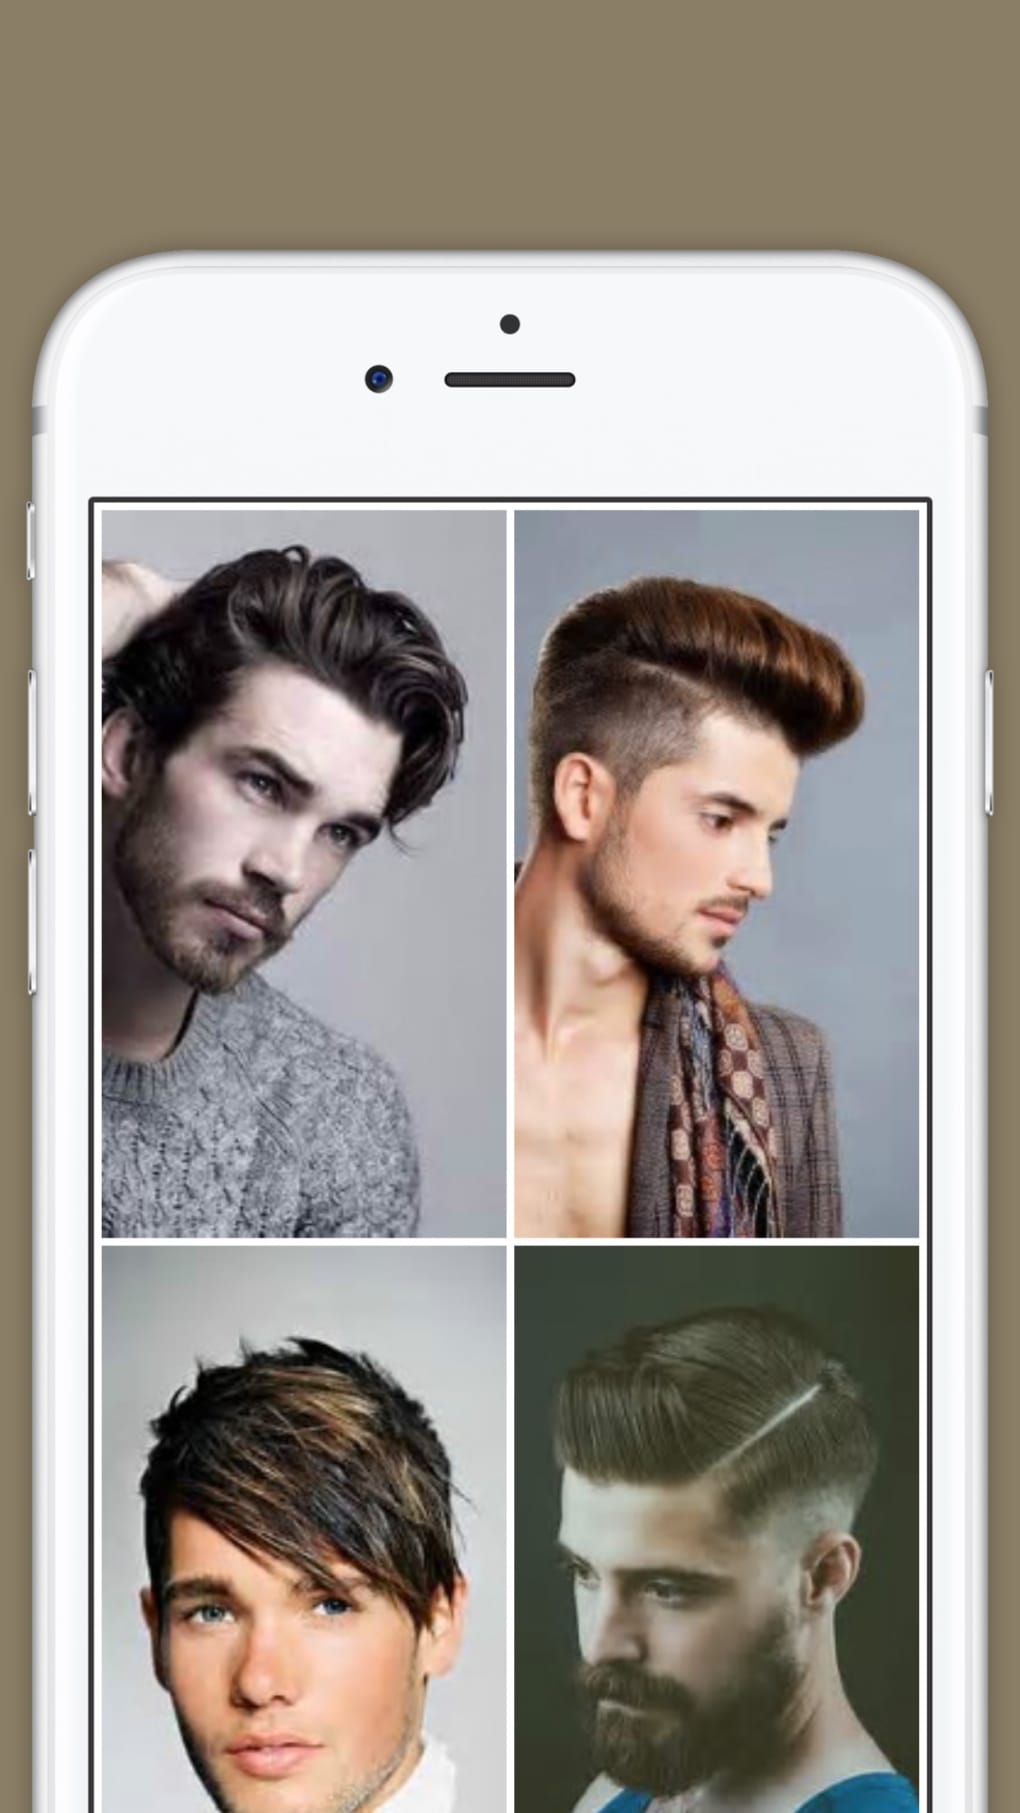 Perfect Hairstyle-Women Men for iPhone - Download